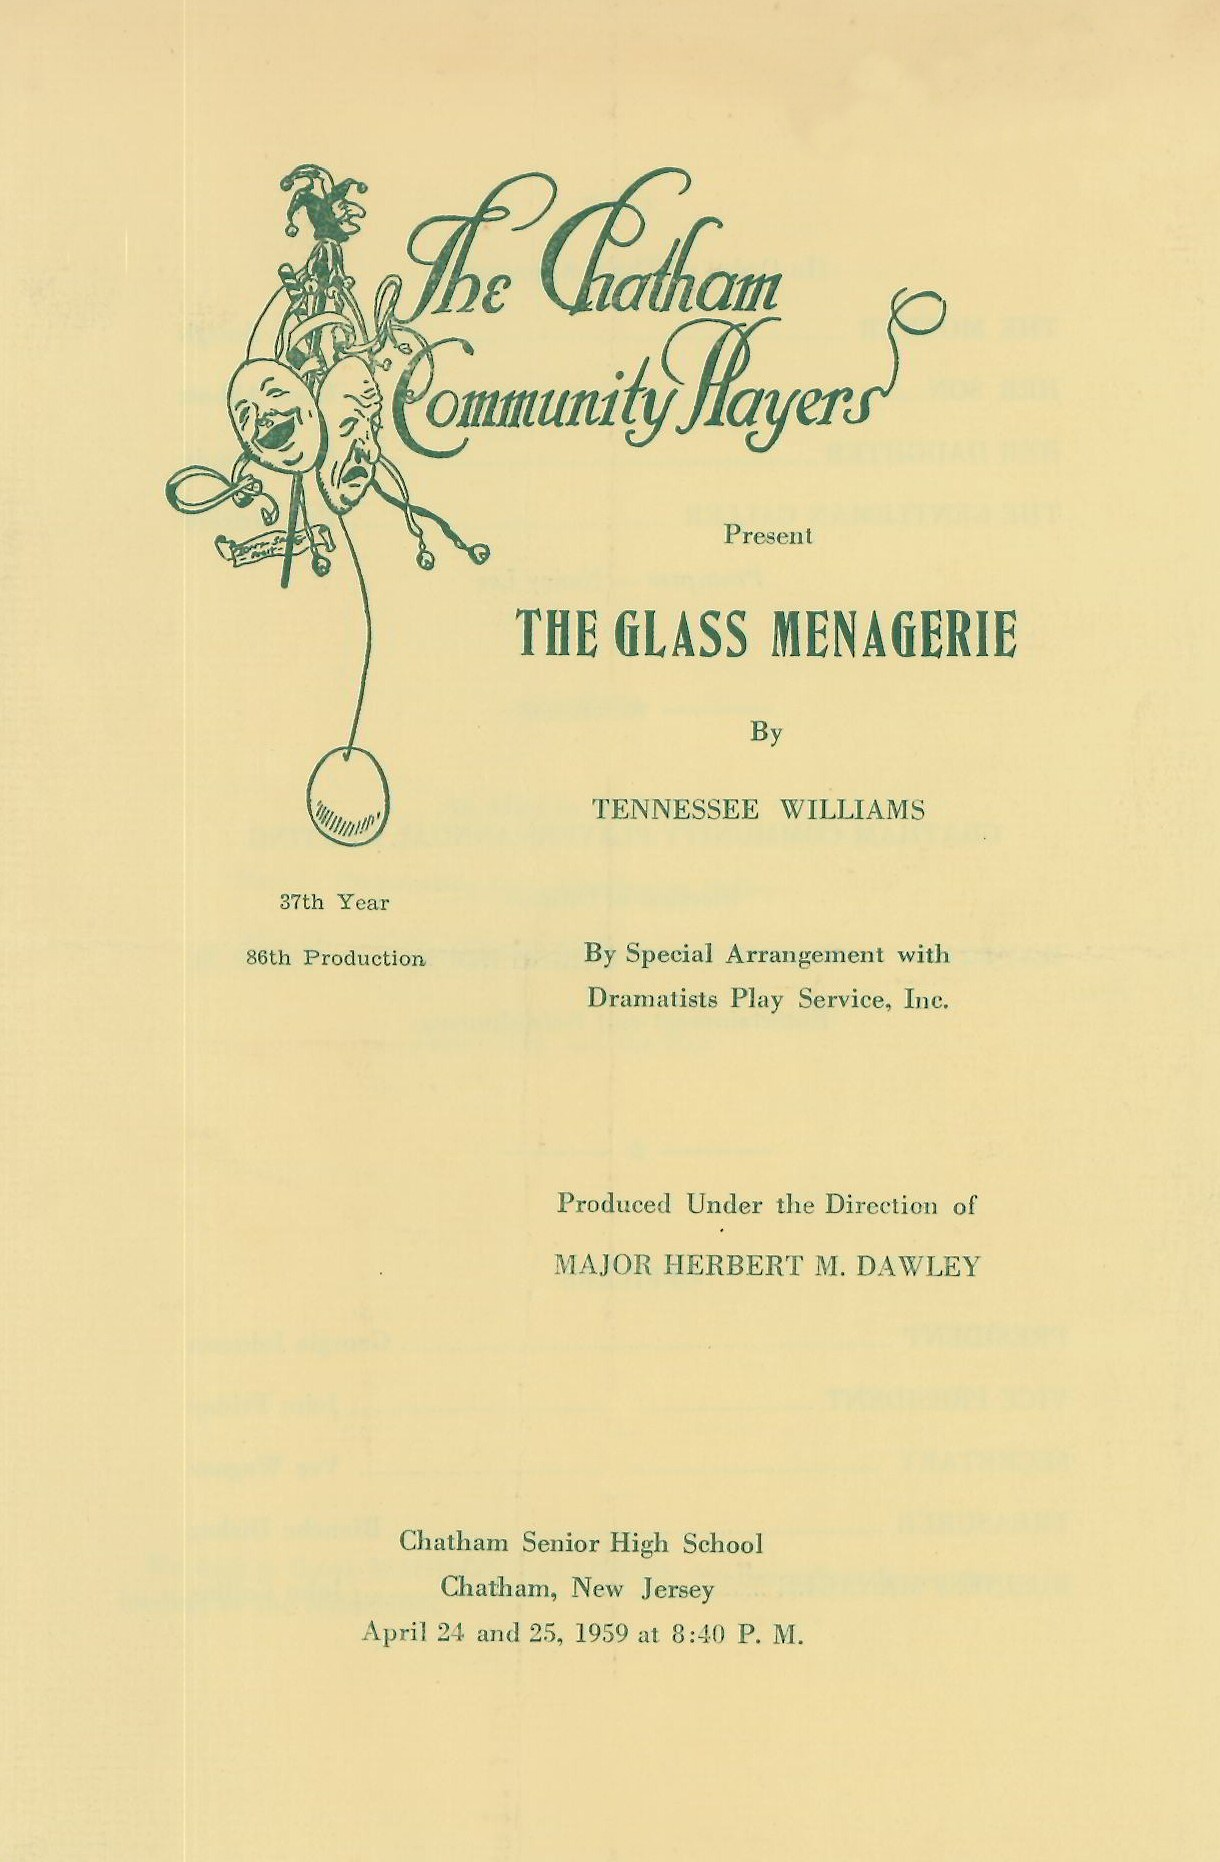 The Glass Menagerie (1959)